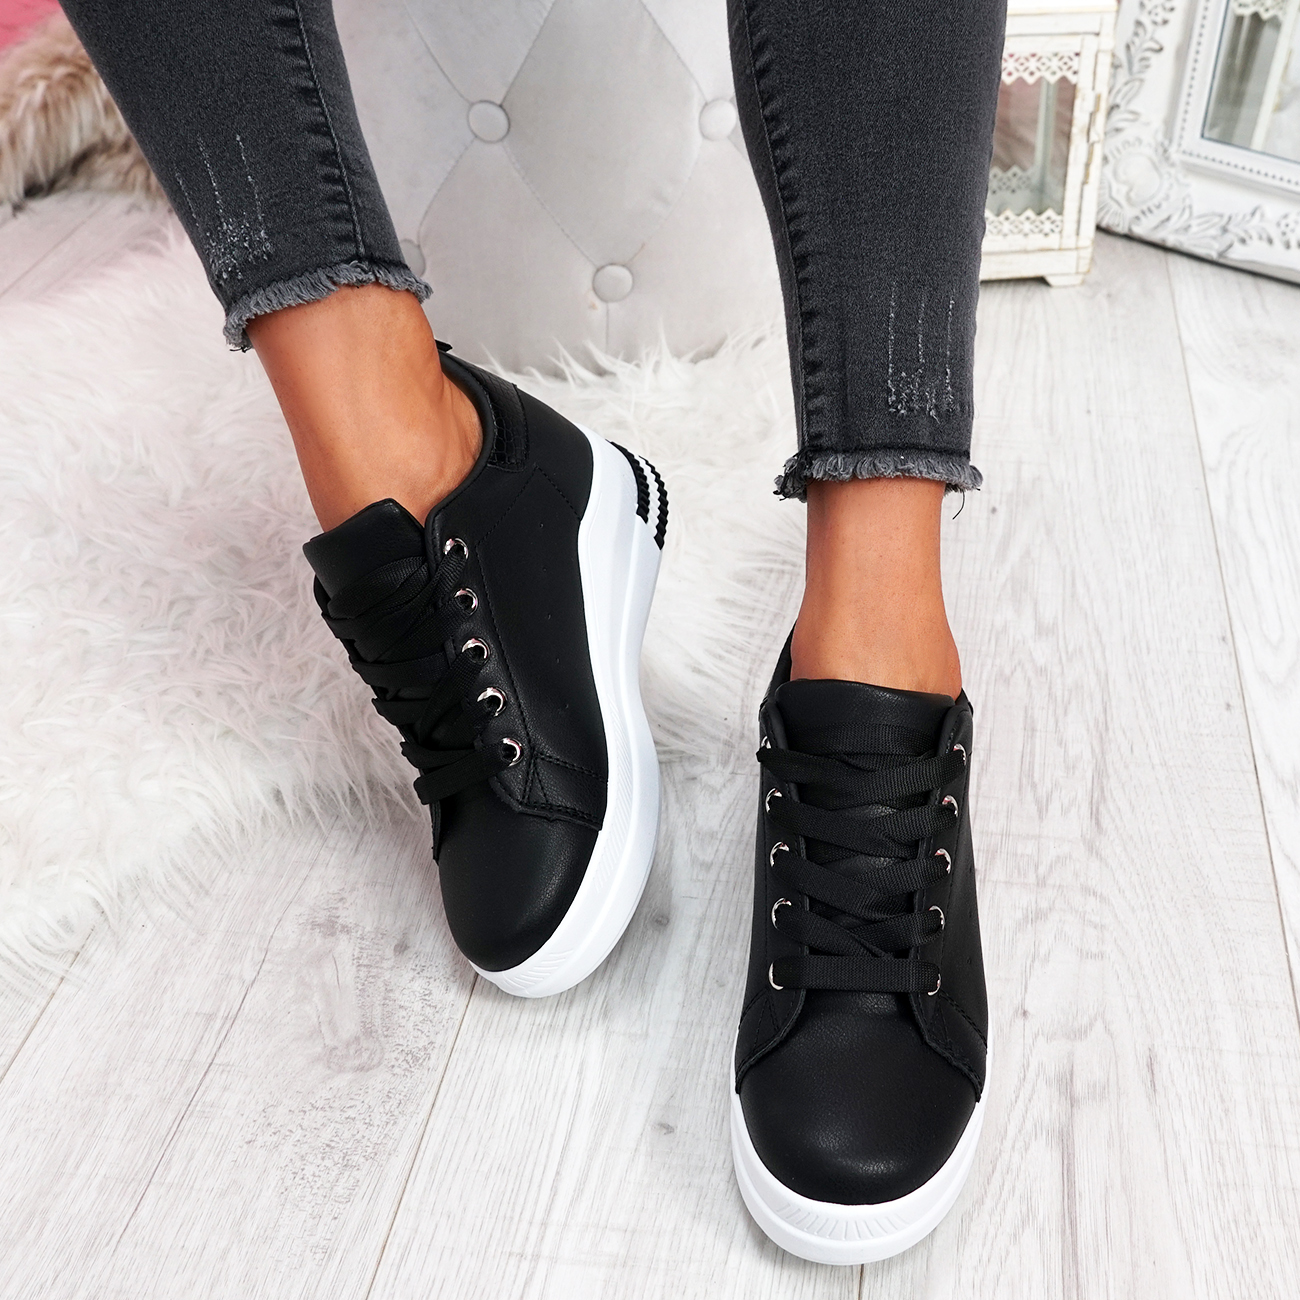 wedge sneakers for women